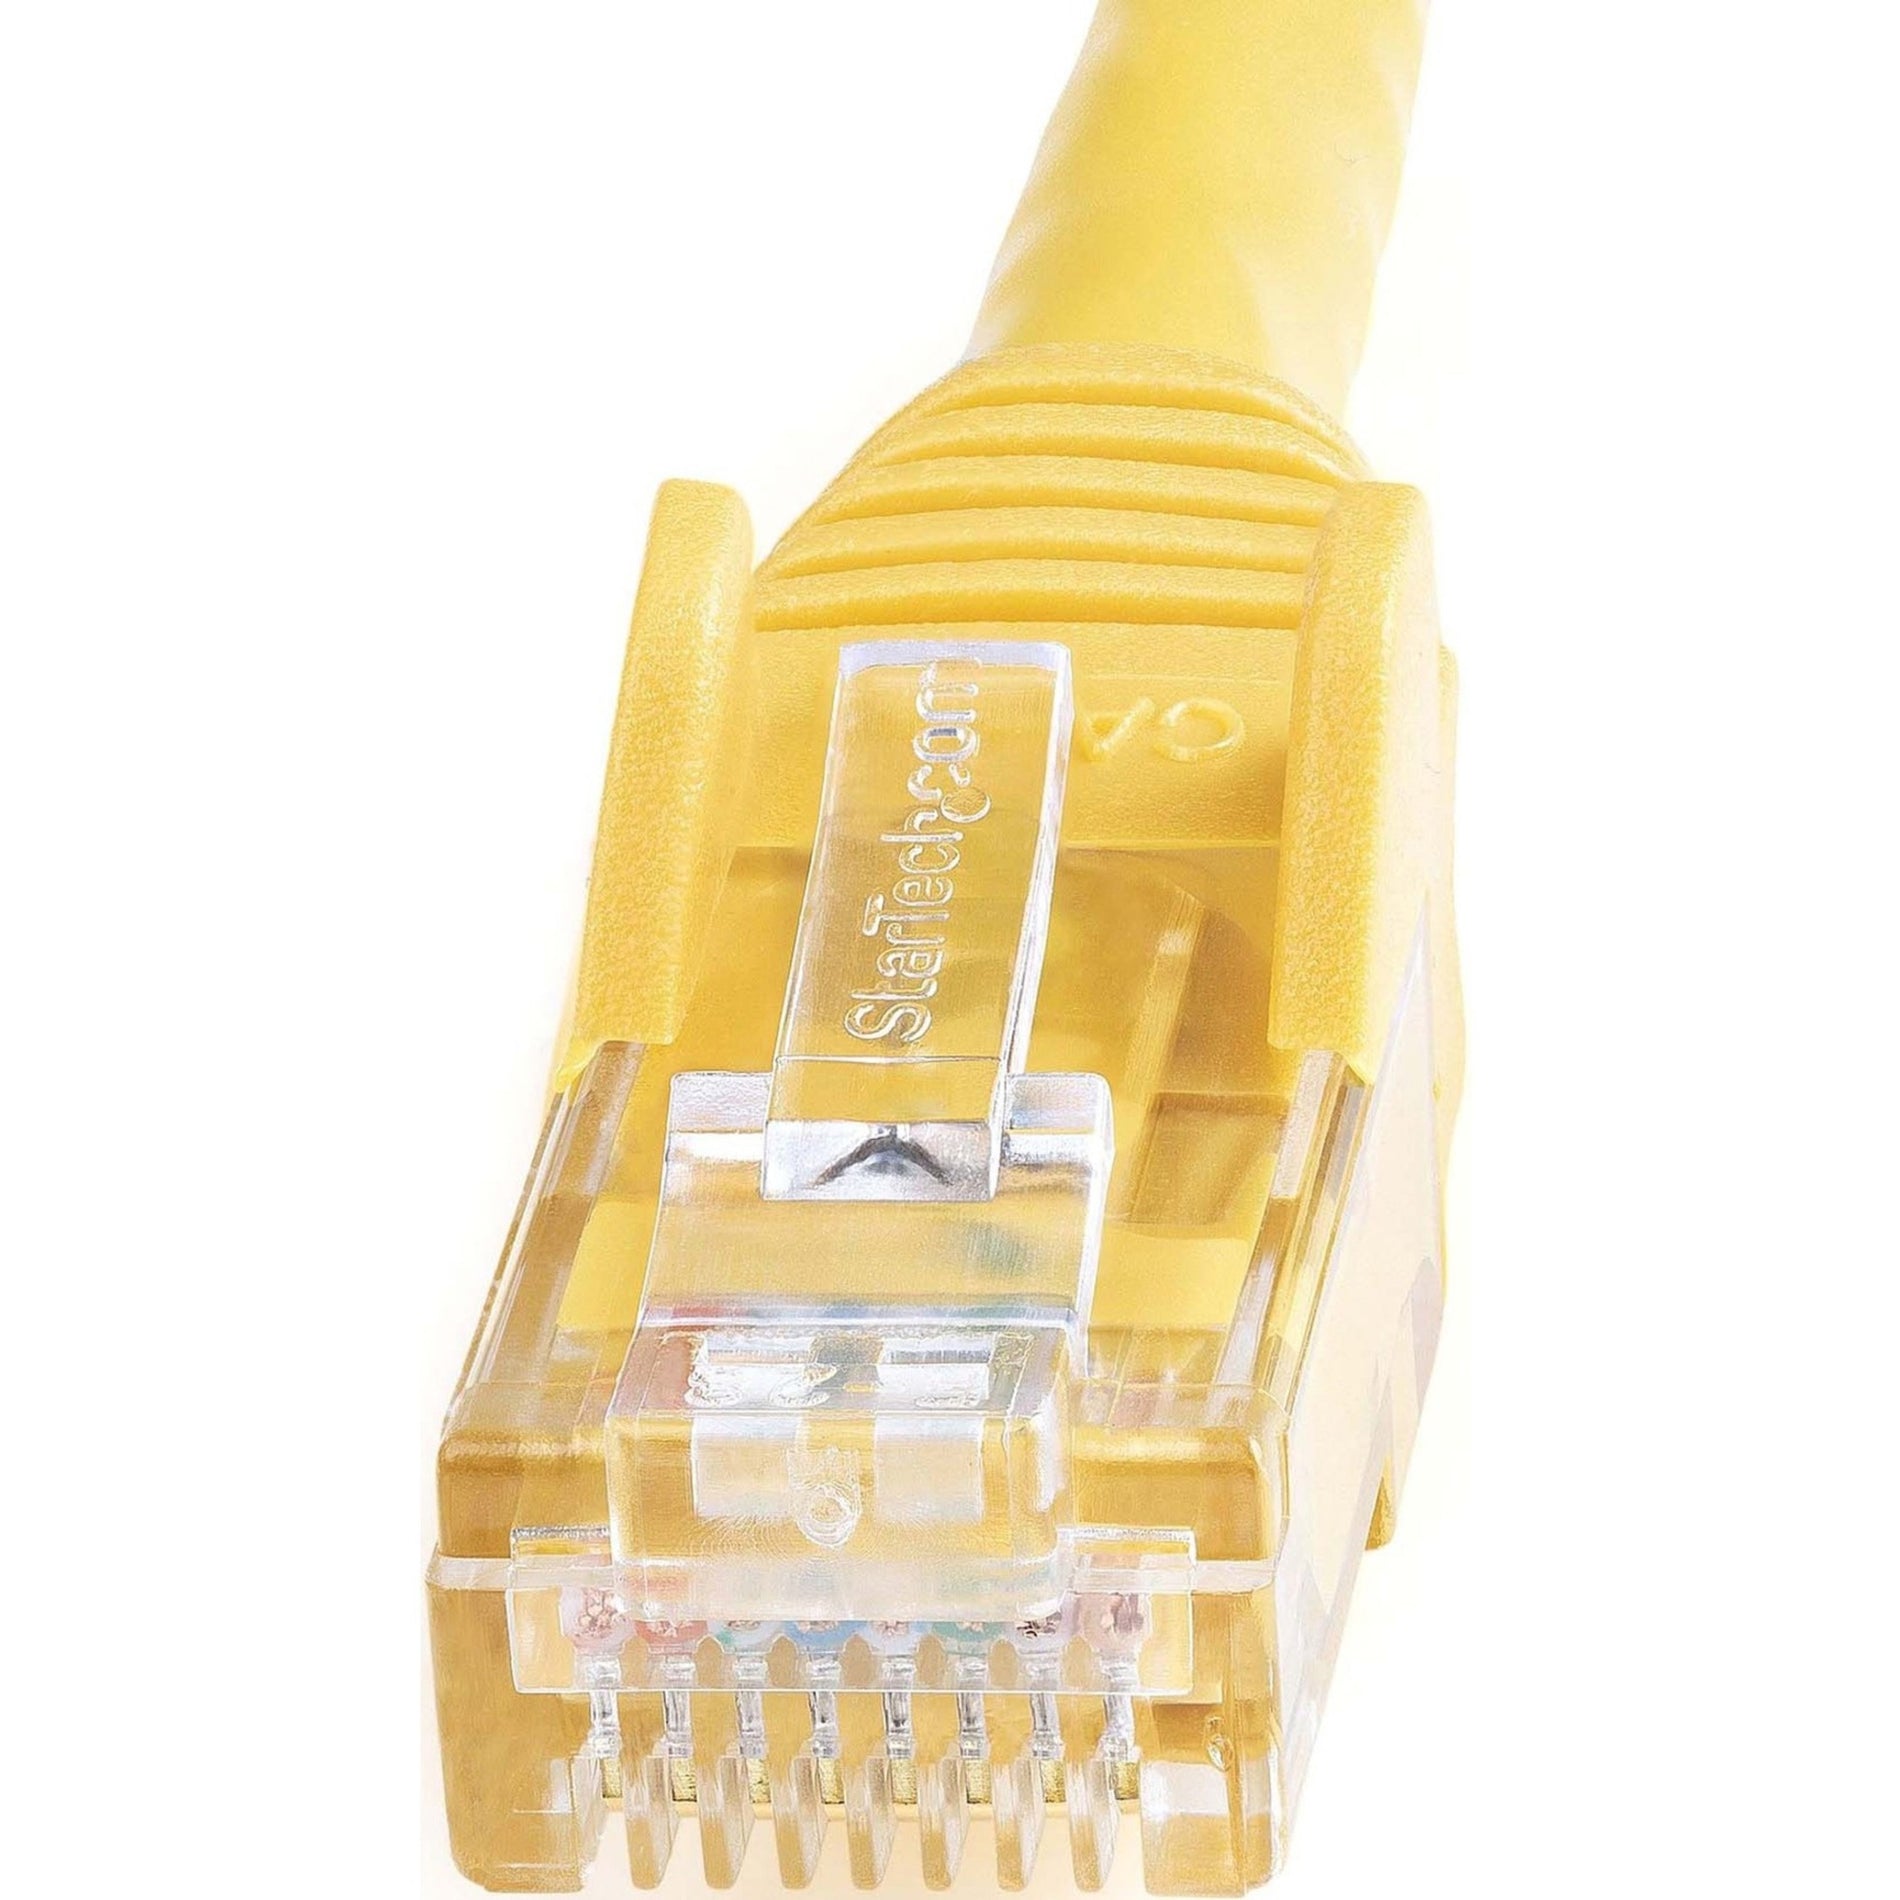 StarTech.com N6PATCH75YL 75 ft Yellow Snagless Cat6 UTP Patch Cable, Lifetime Warranty, Gold Connectors, Easy Cable Routing